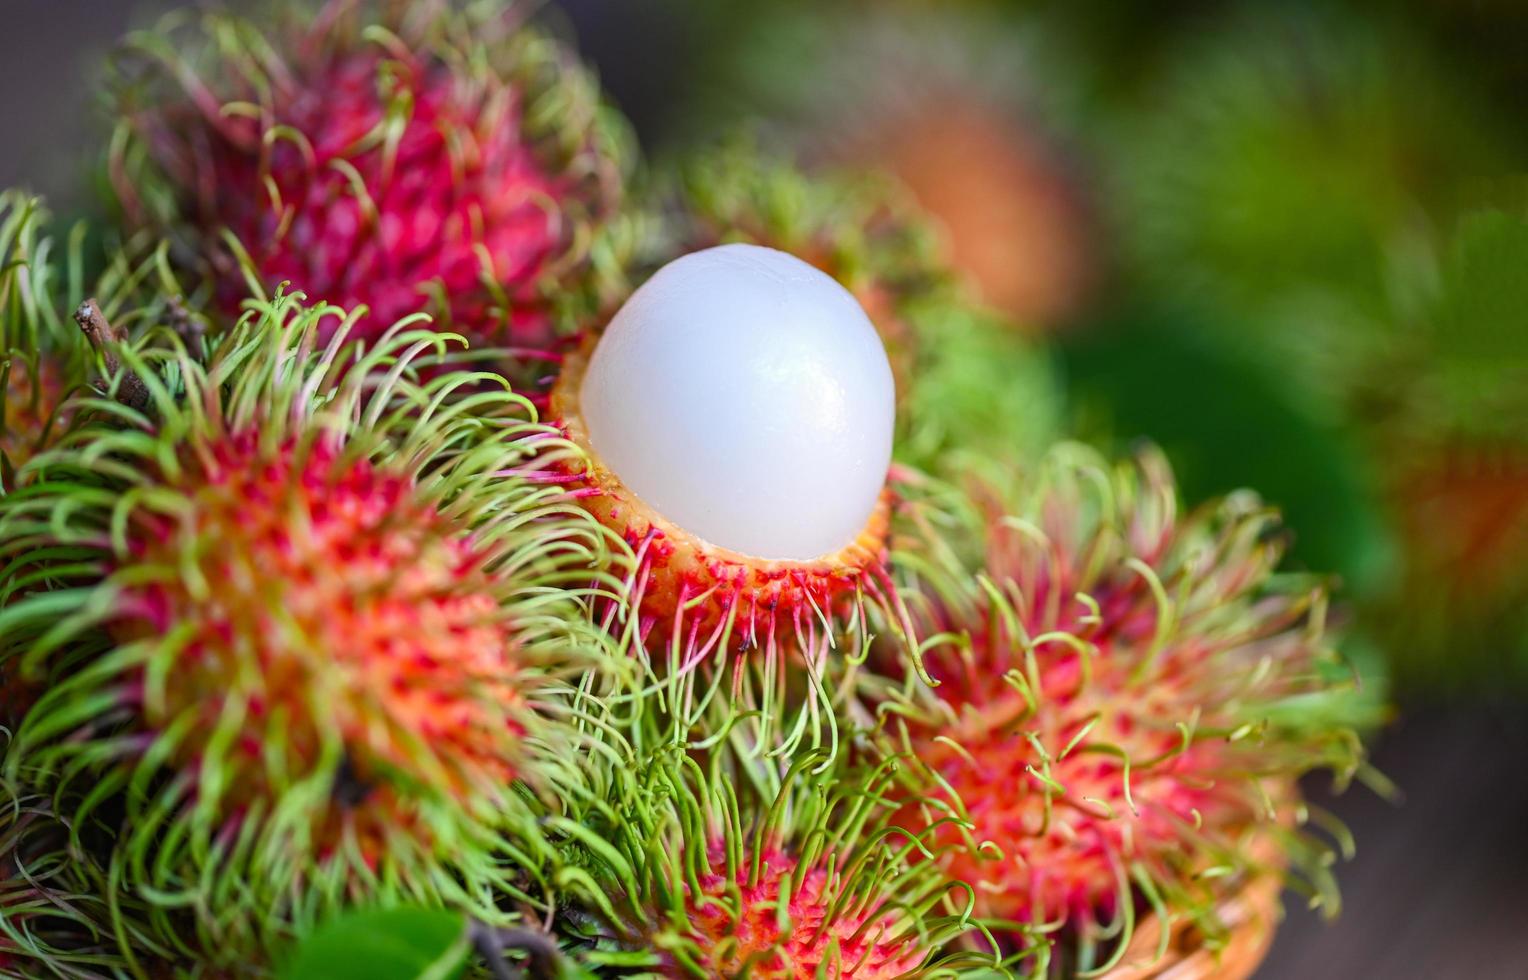 Fresh and ripe rambutan sweet tropical fruit peeled rambutan with leaves, Rambutan fruit on basket and wooden background harvest from the garden photo